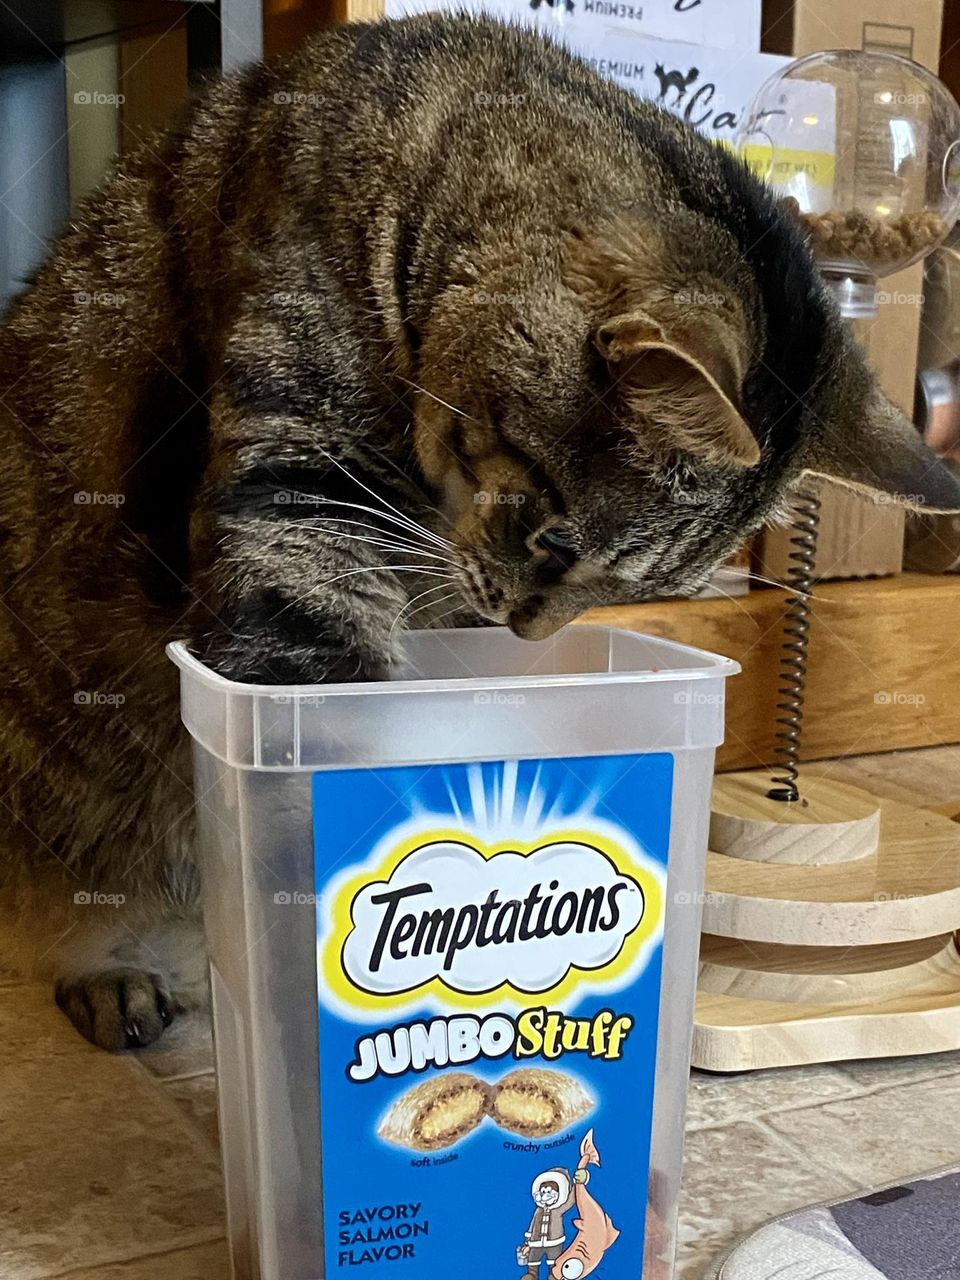 A cat stealing treats straight out of the treat container